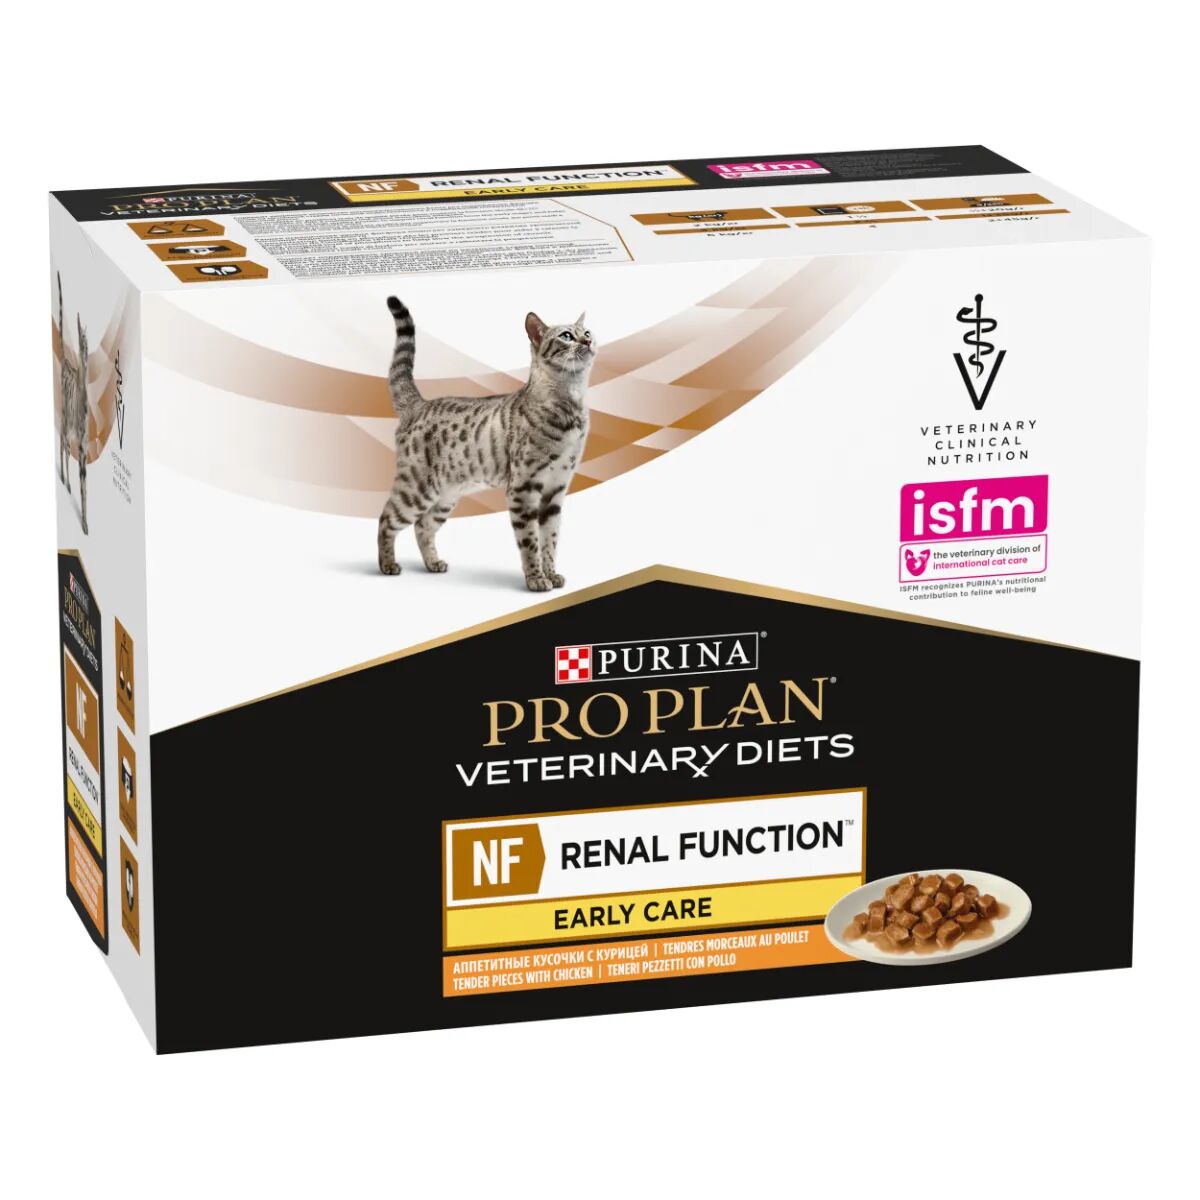 purina pro plan veterinary diets nf renal function early care gatto multipack al pollo 10x85g